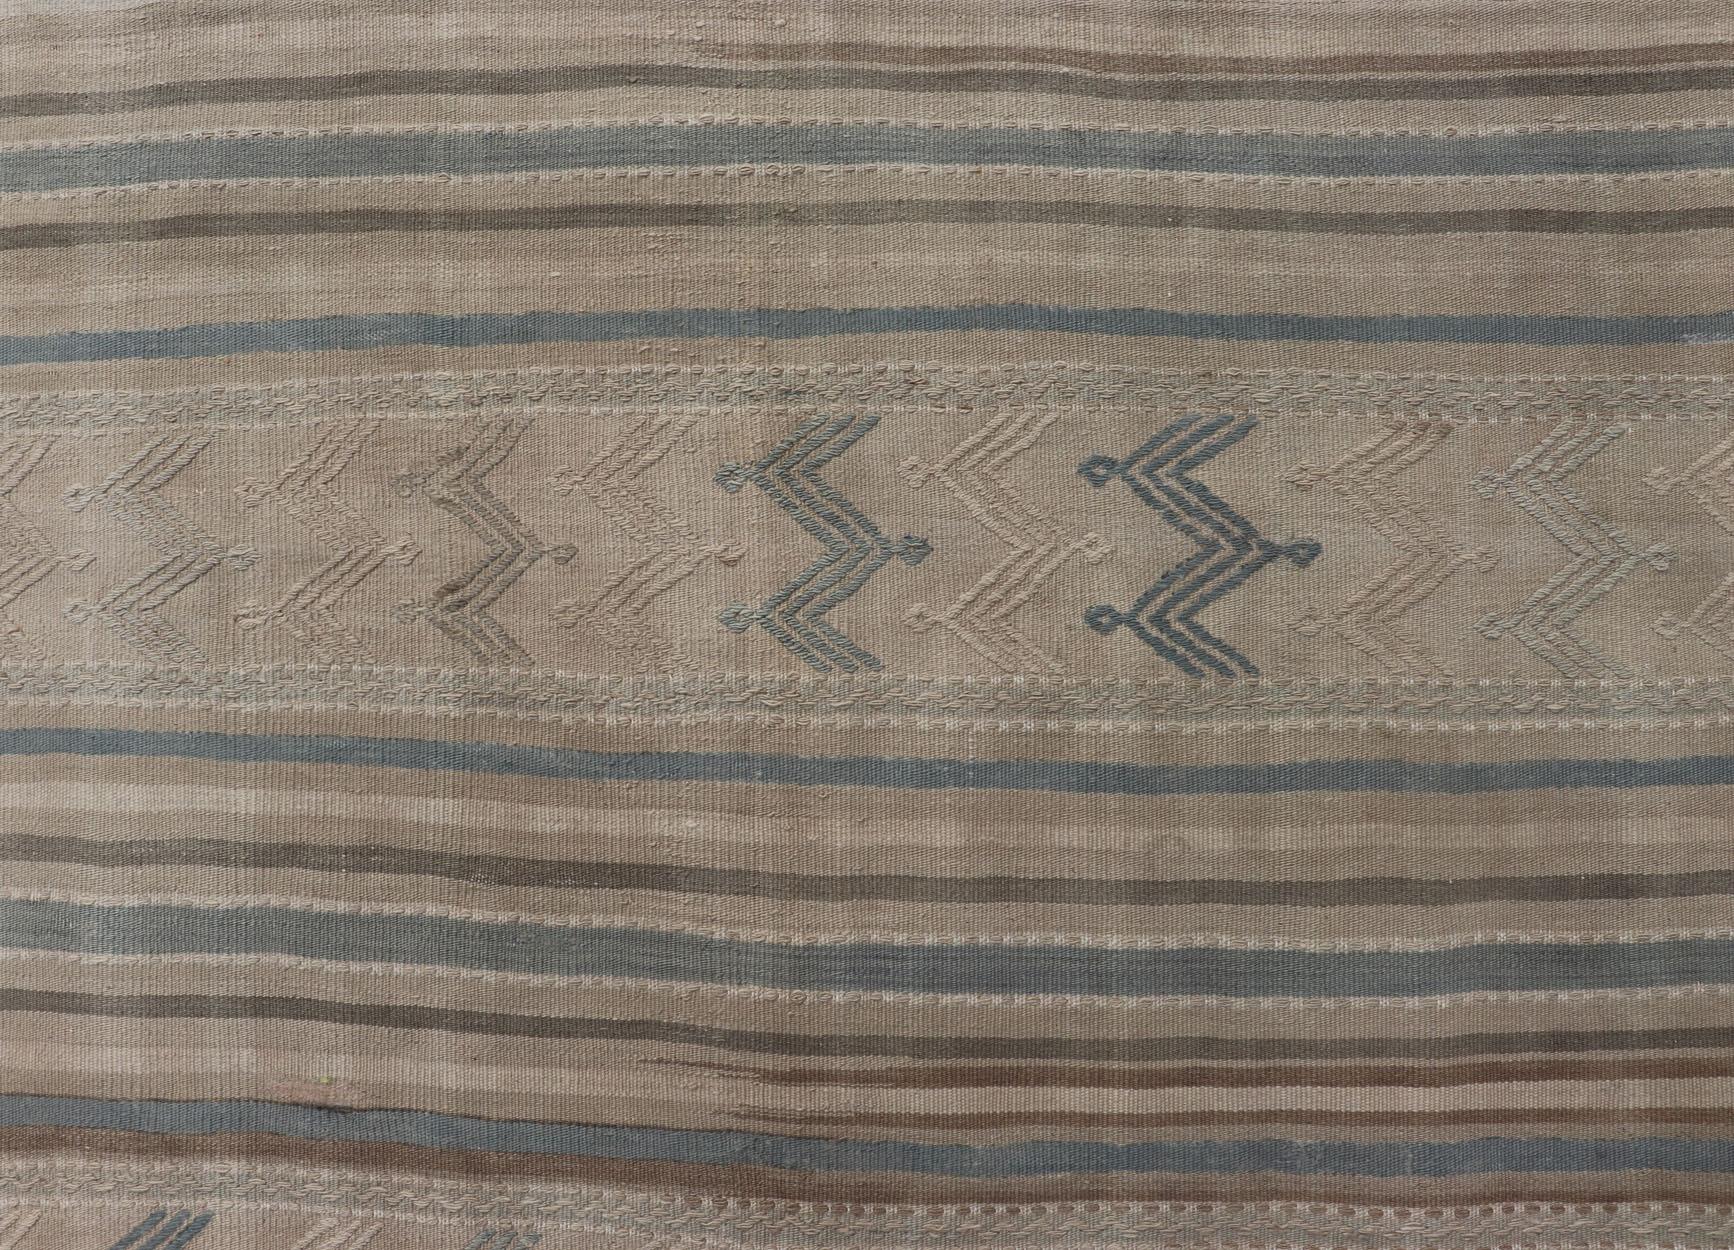 Turkish Vintage Kilim With Embroidered Motifs in Light Tan, Blue L. Brown For Sale 4